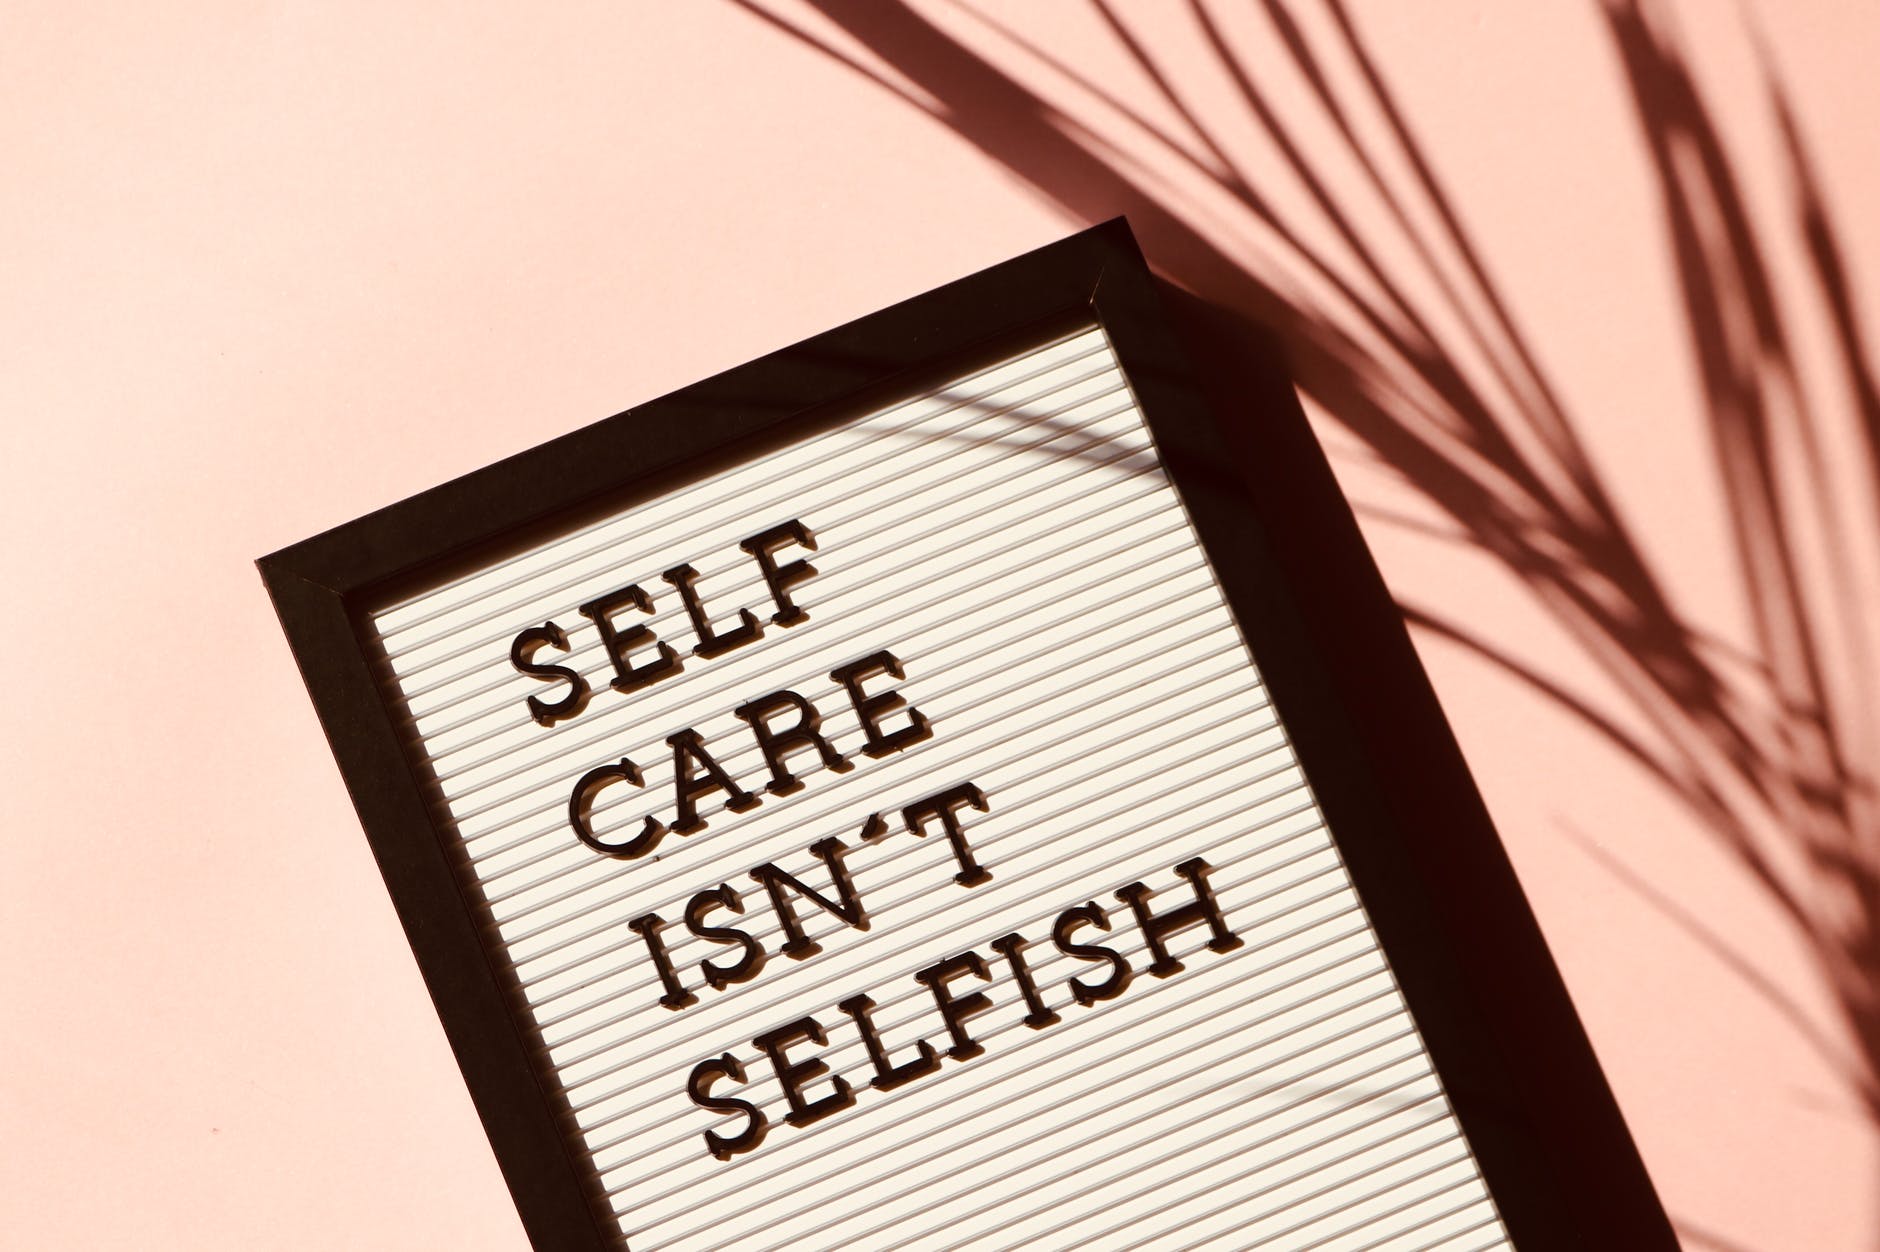 SELF-CARE: 6 ways to take care of yourself during these crazy times